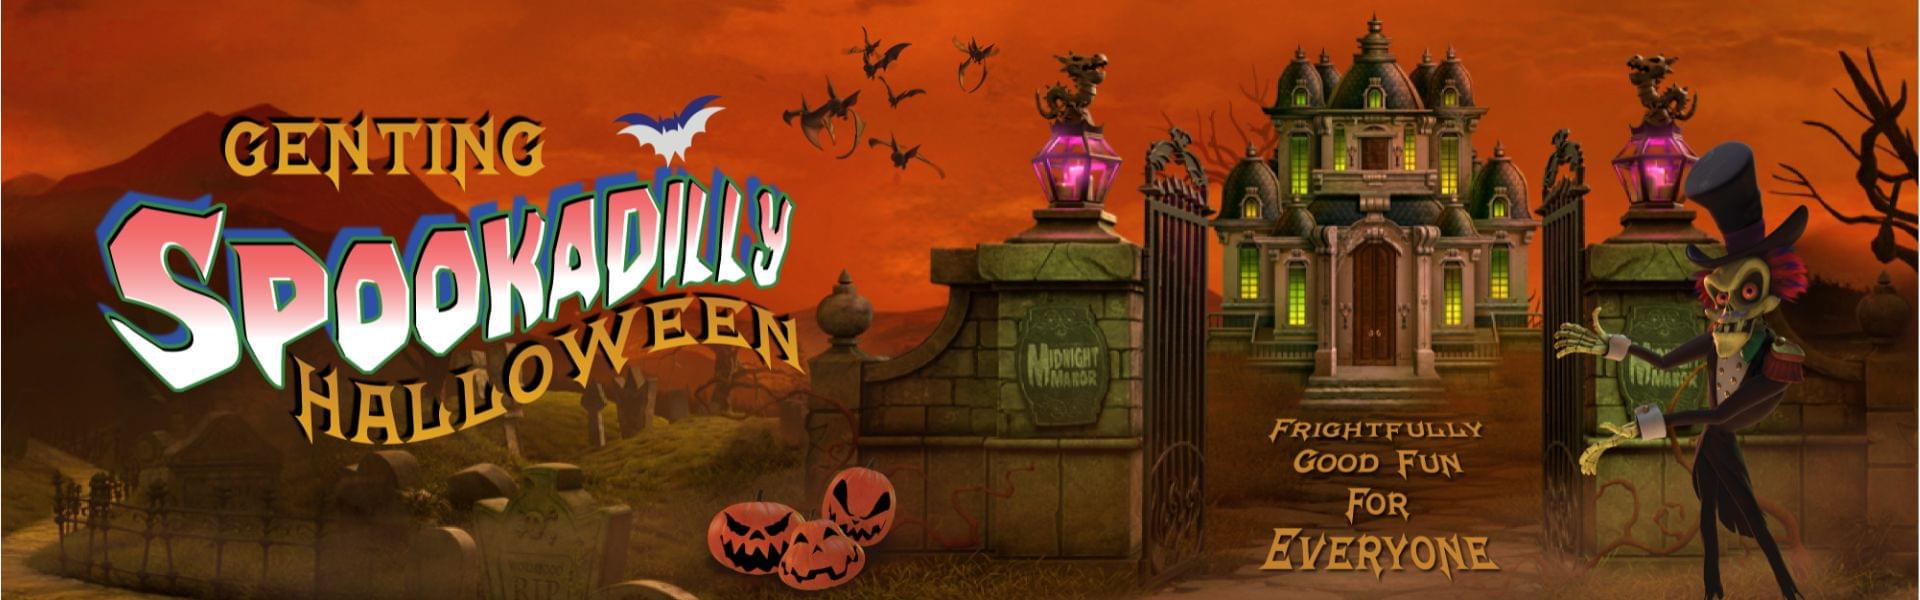 Fun-filled scary activities await you at Genting Spookadilly Halloween 2022